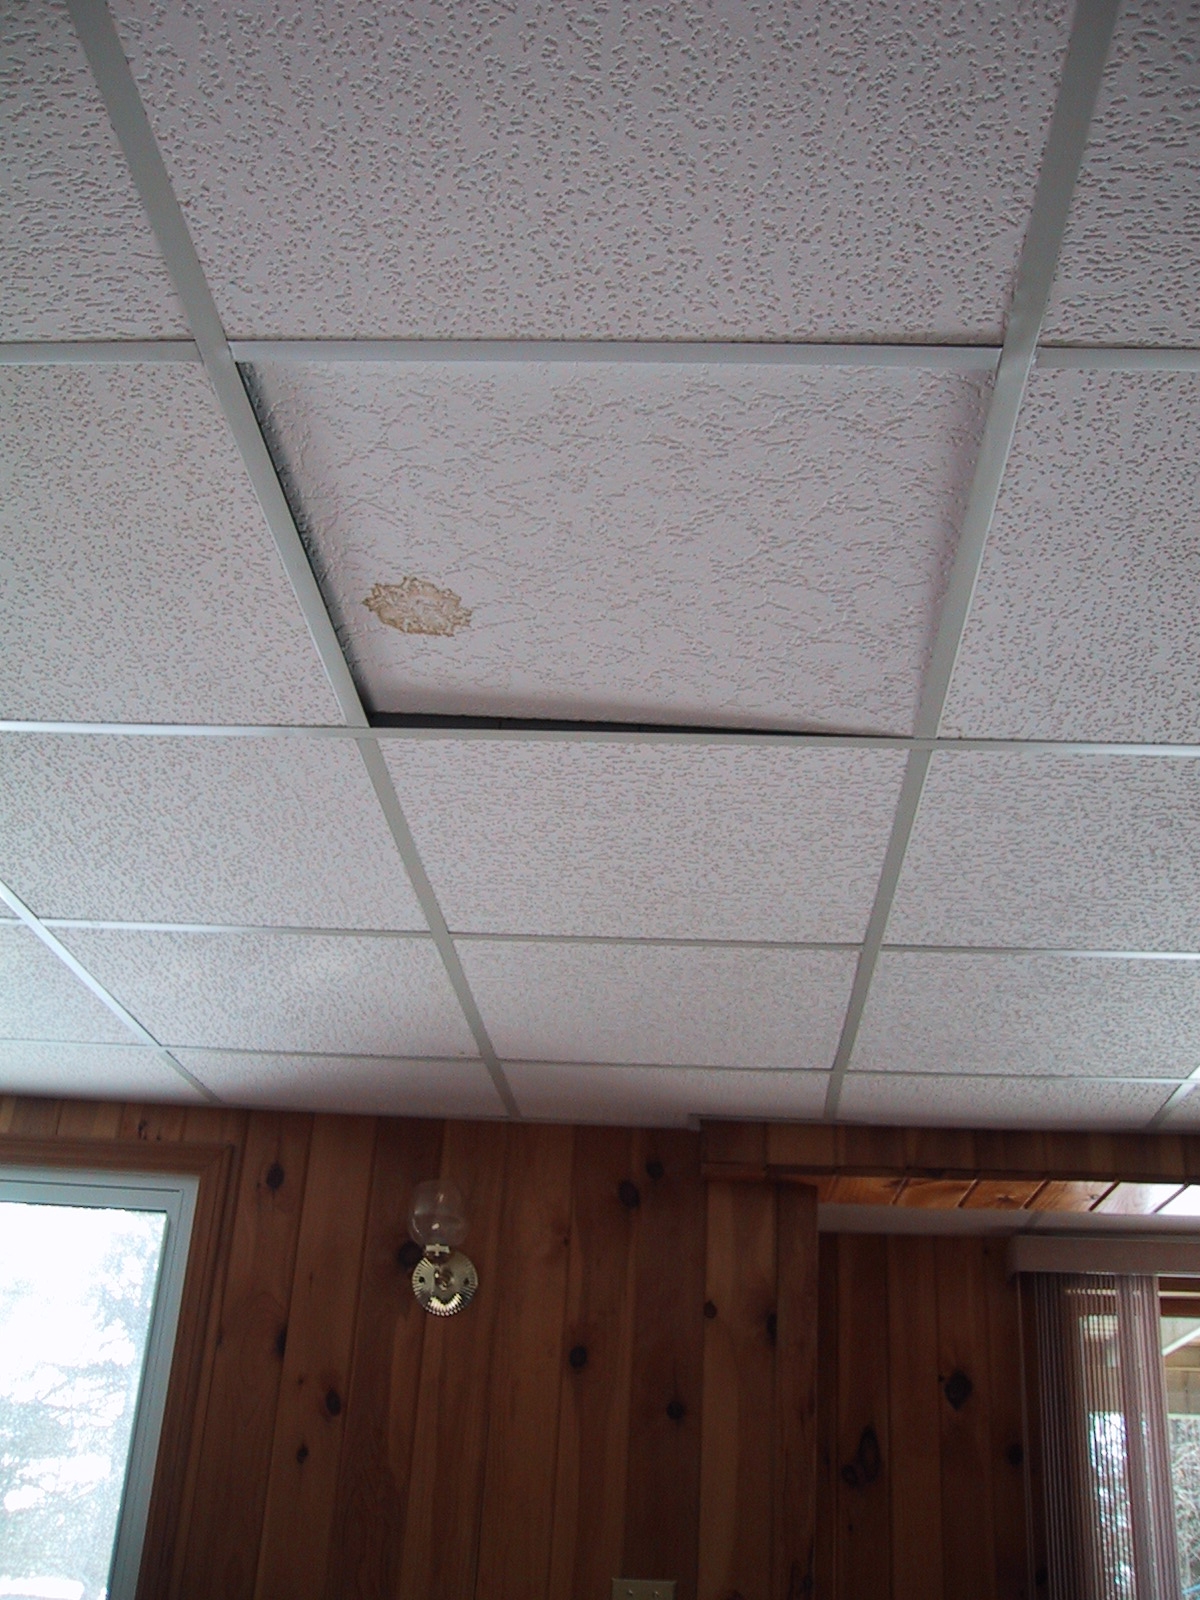 Brown Spots On Ceiling Tiles Brown Spots On Ceiling Tiles basement ceiling leak part 1 the discovery 1200 X 1600